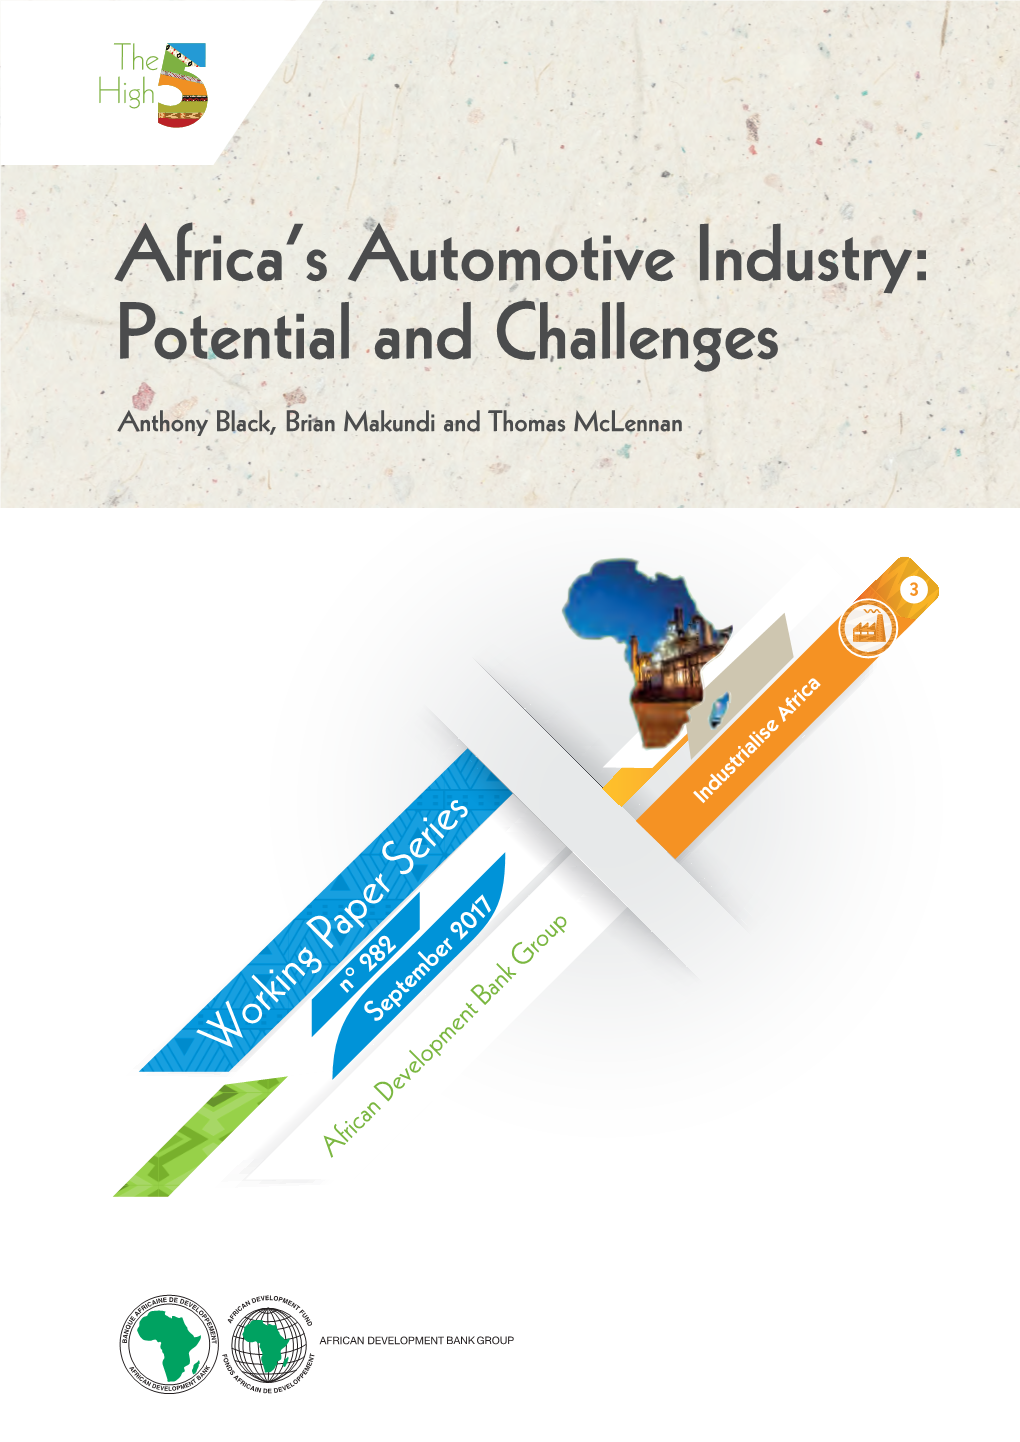 Africa's Automotive Industry: Potential and Challenges